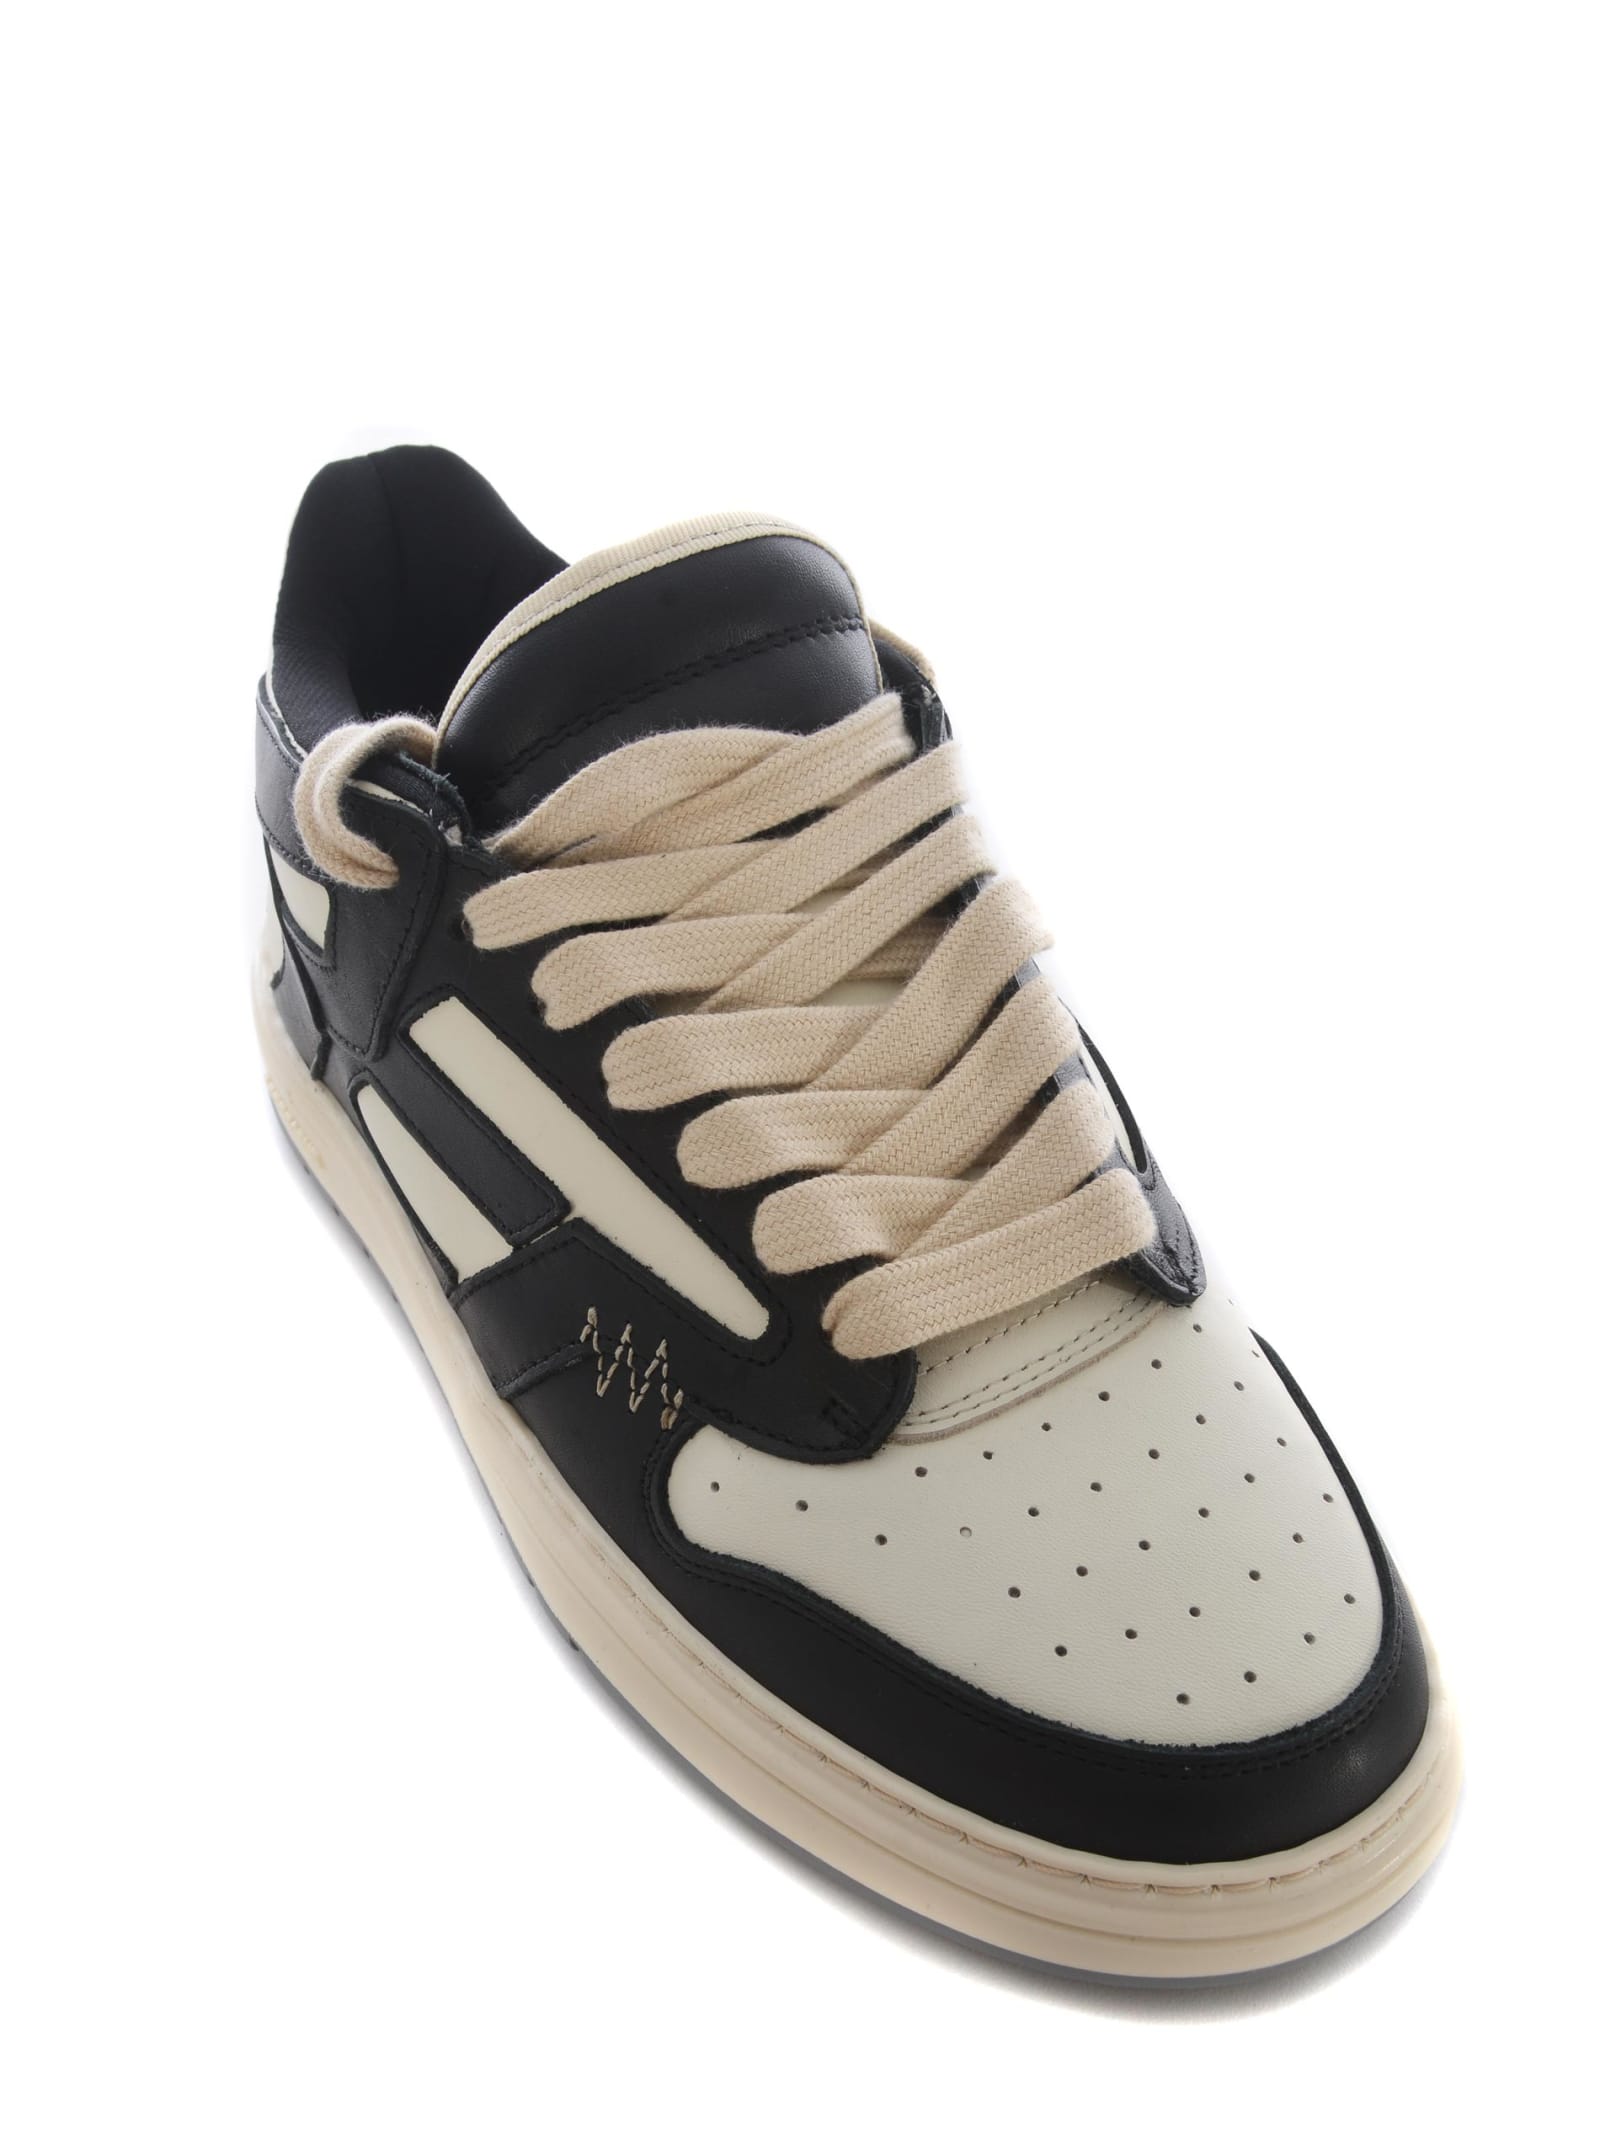 Shop Represent Sneakers  Made Of Leather In Beige